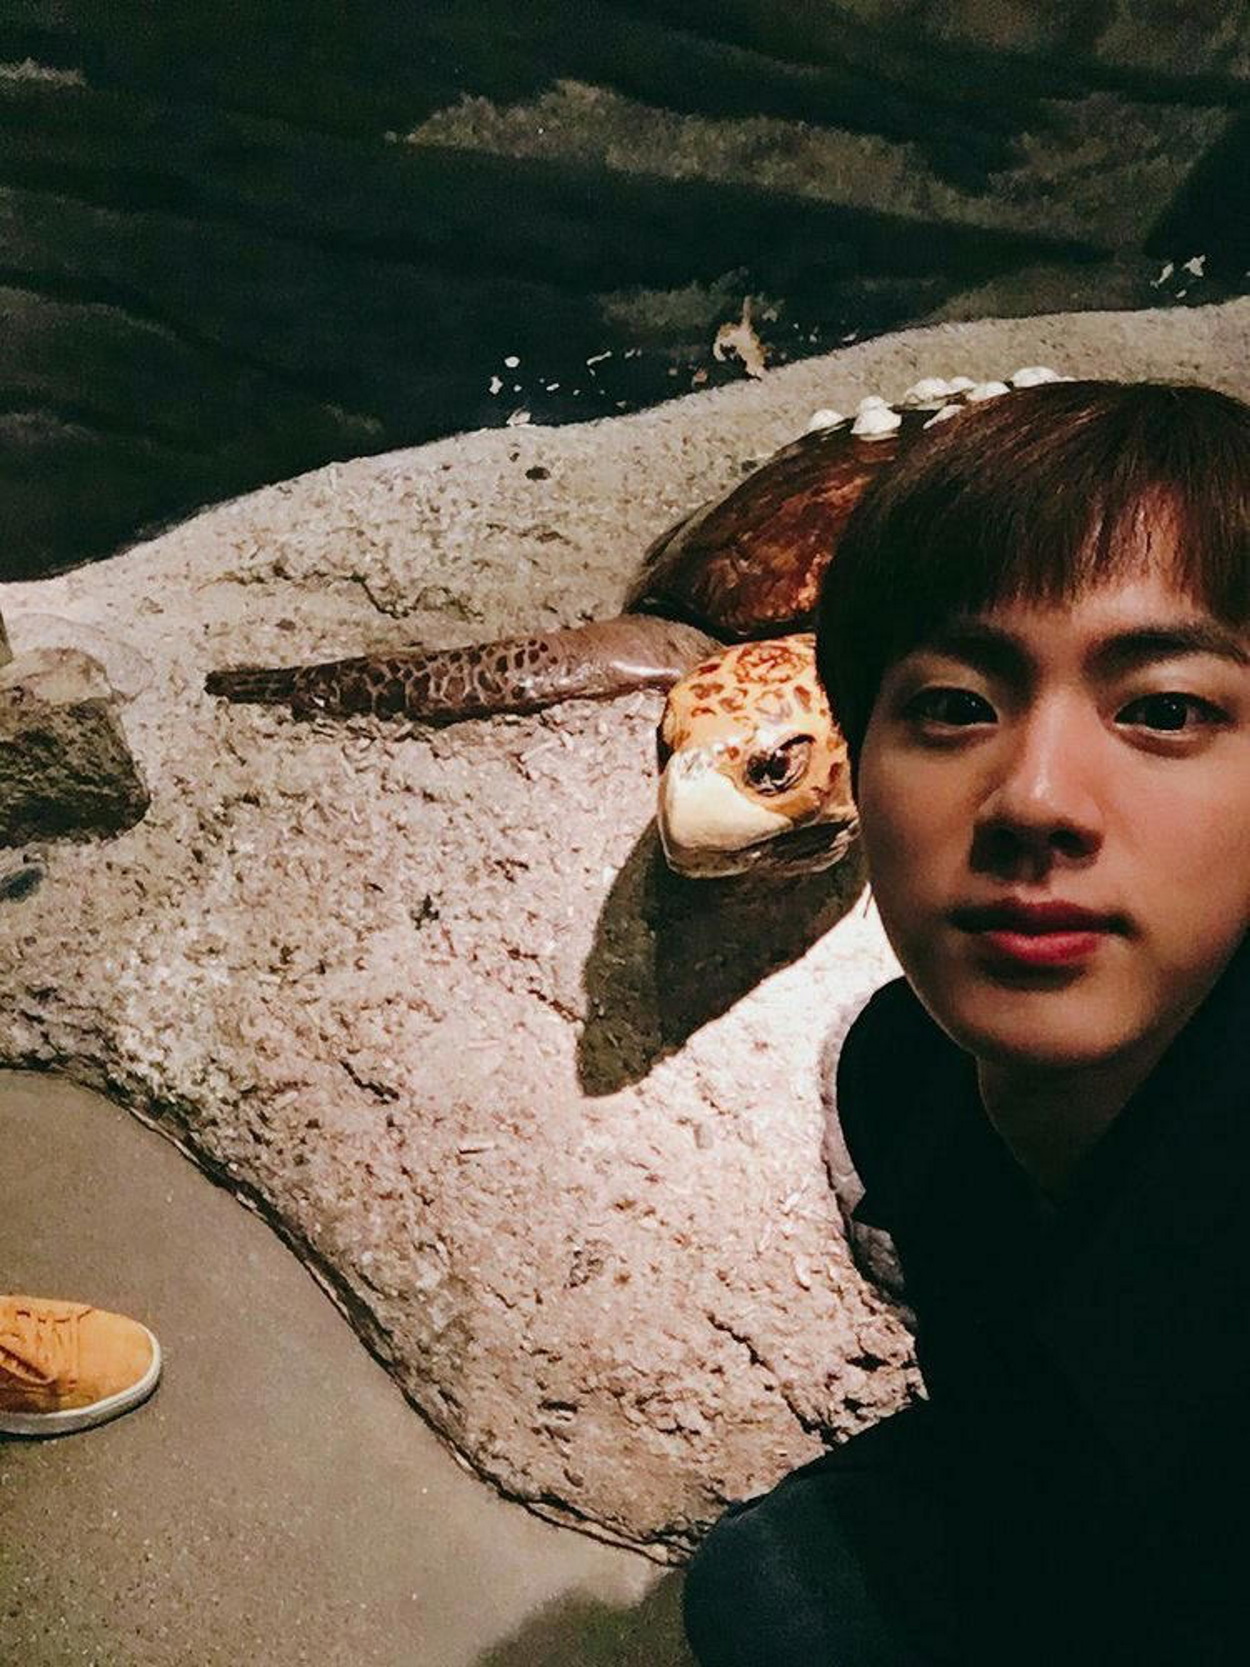 BTS Jin, “Crocs” slippers and the Water Turtle